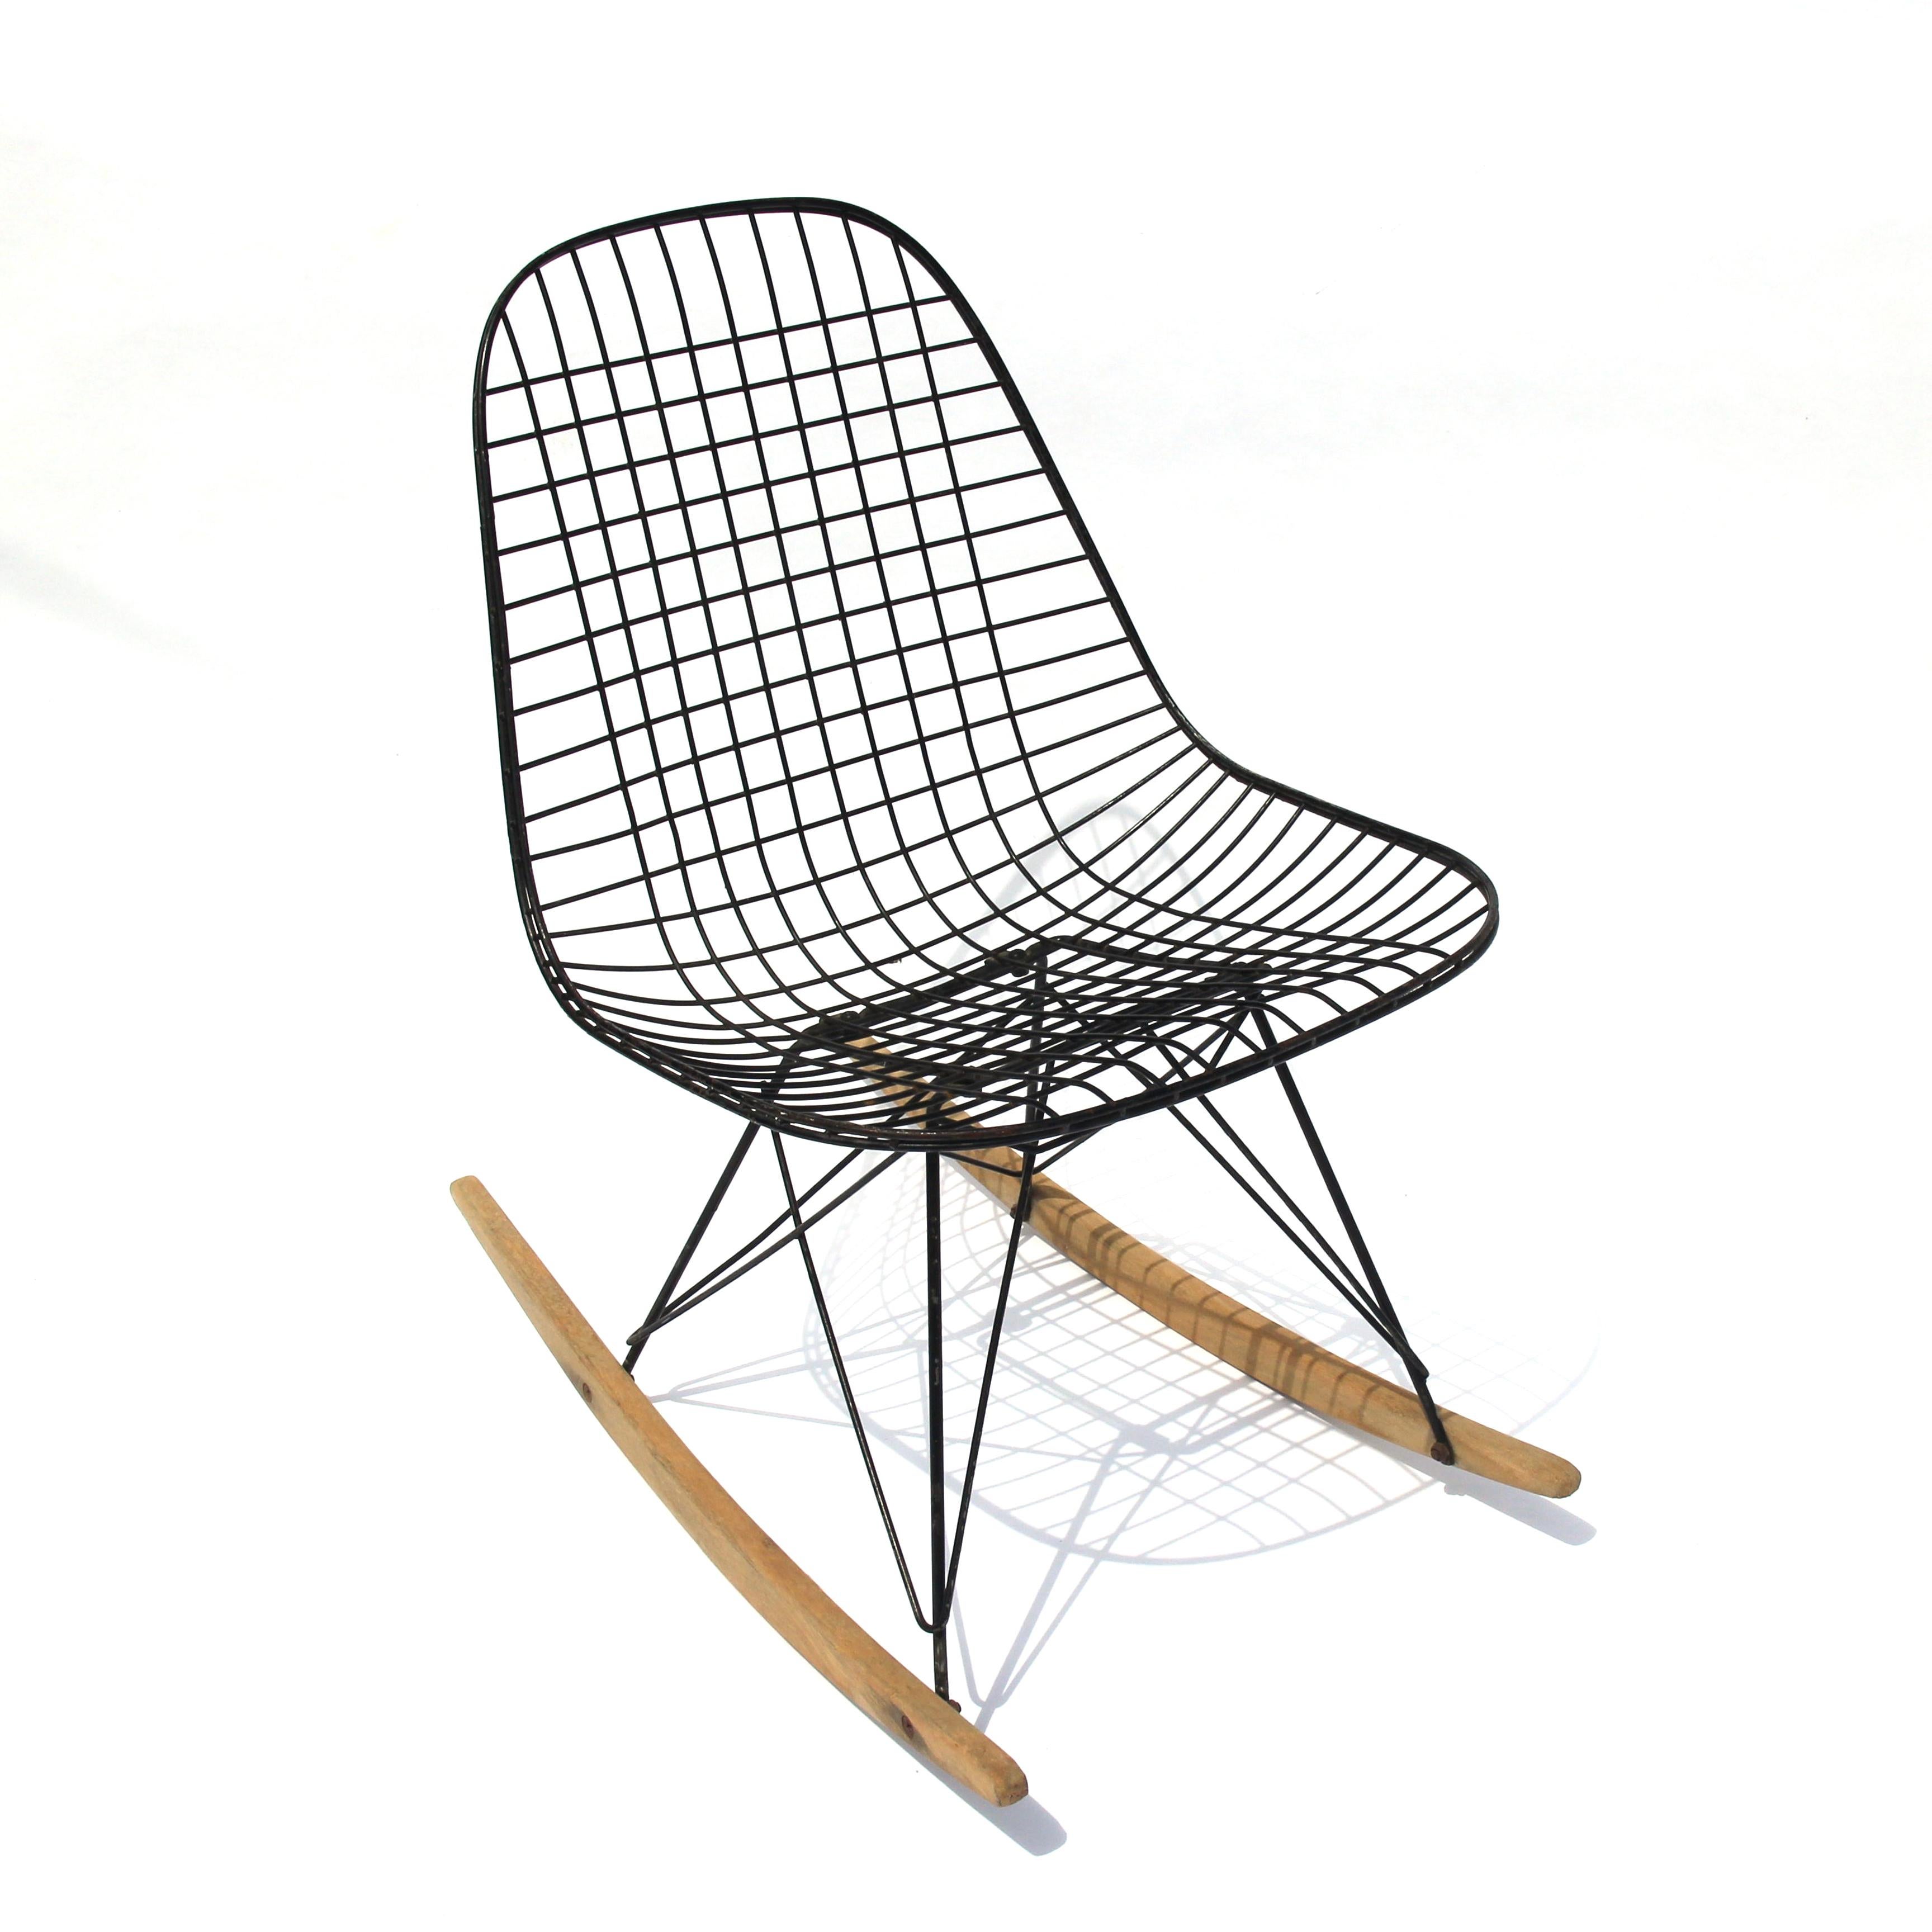 Charles and Ray Eames designed their fiberglass and wire chairs to be fitted with a wide variety of bases to offer a range of heights, uses, and aesthetics. One of the most desirable today is the rocker. This rare early example of the RKR dates from